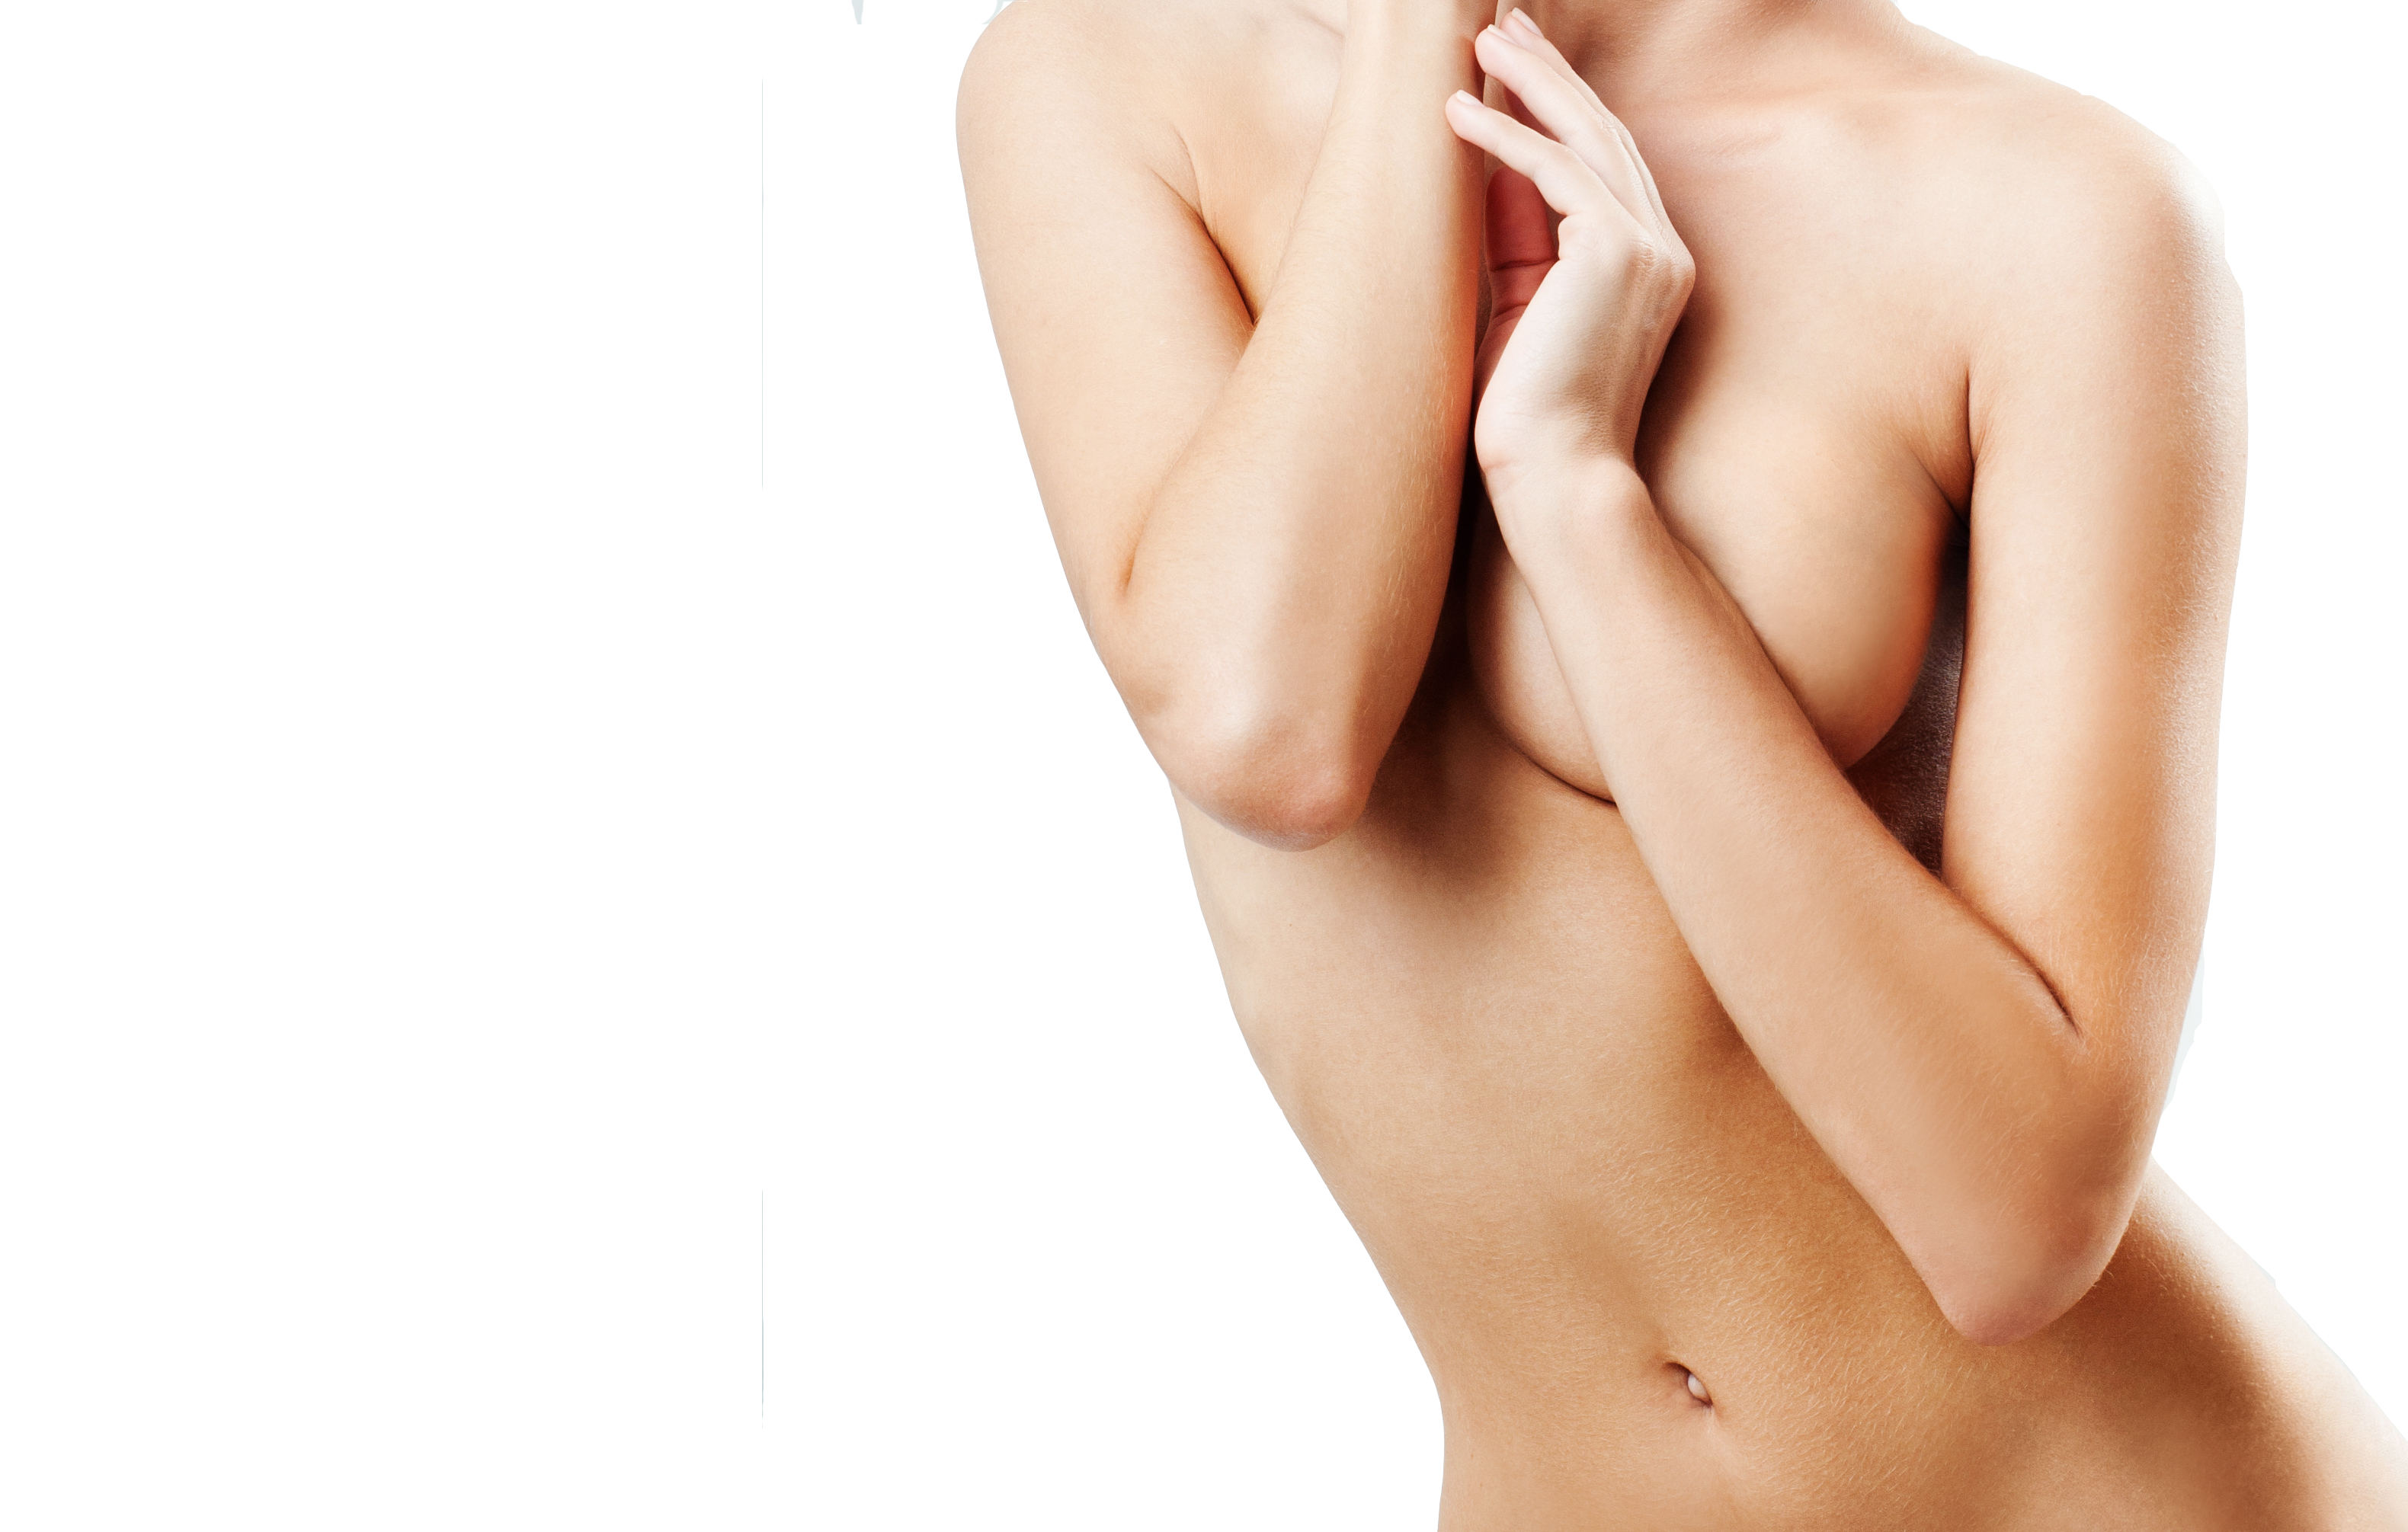 reastmastectomy breast reconstruction after surgery